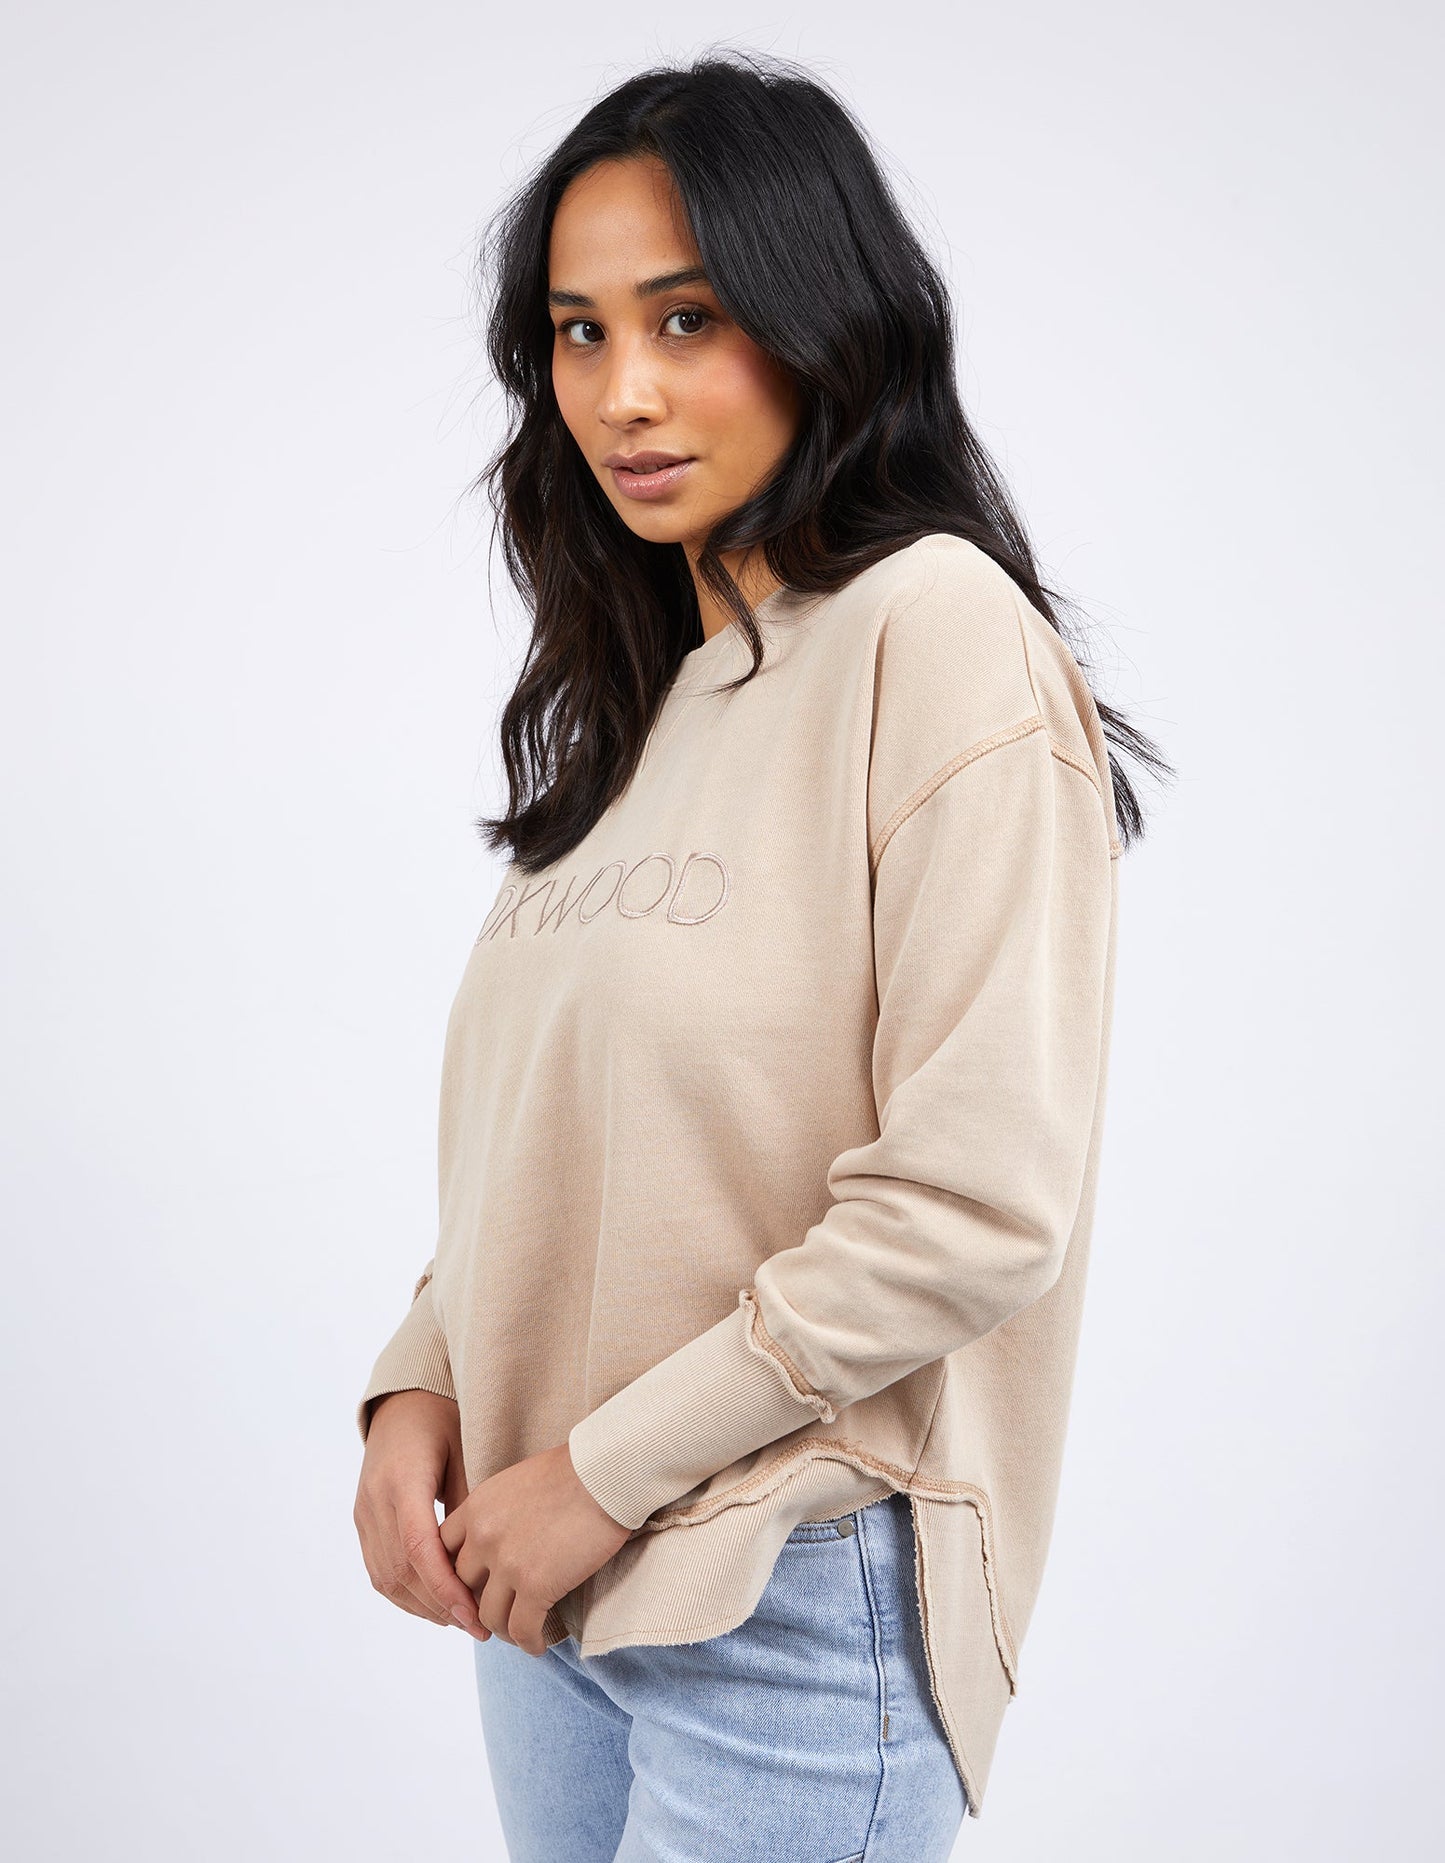 FOXWOOD SIMPLIFIED CREW - OATMEAL - THE VOGUE STORE